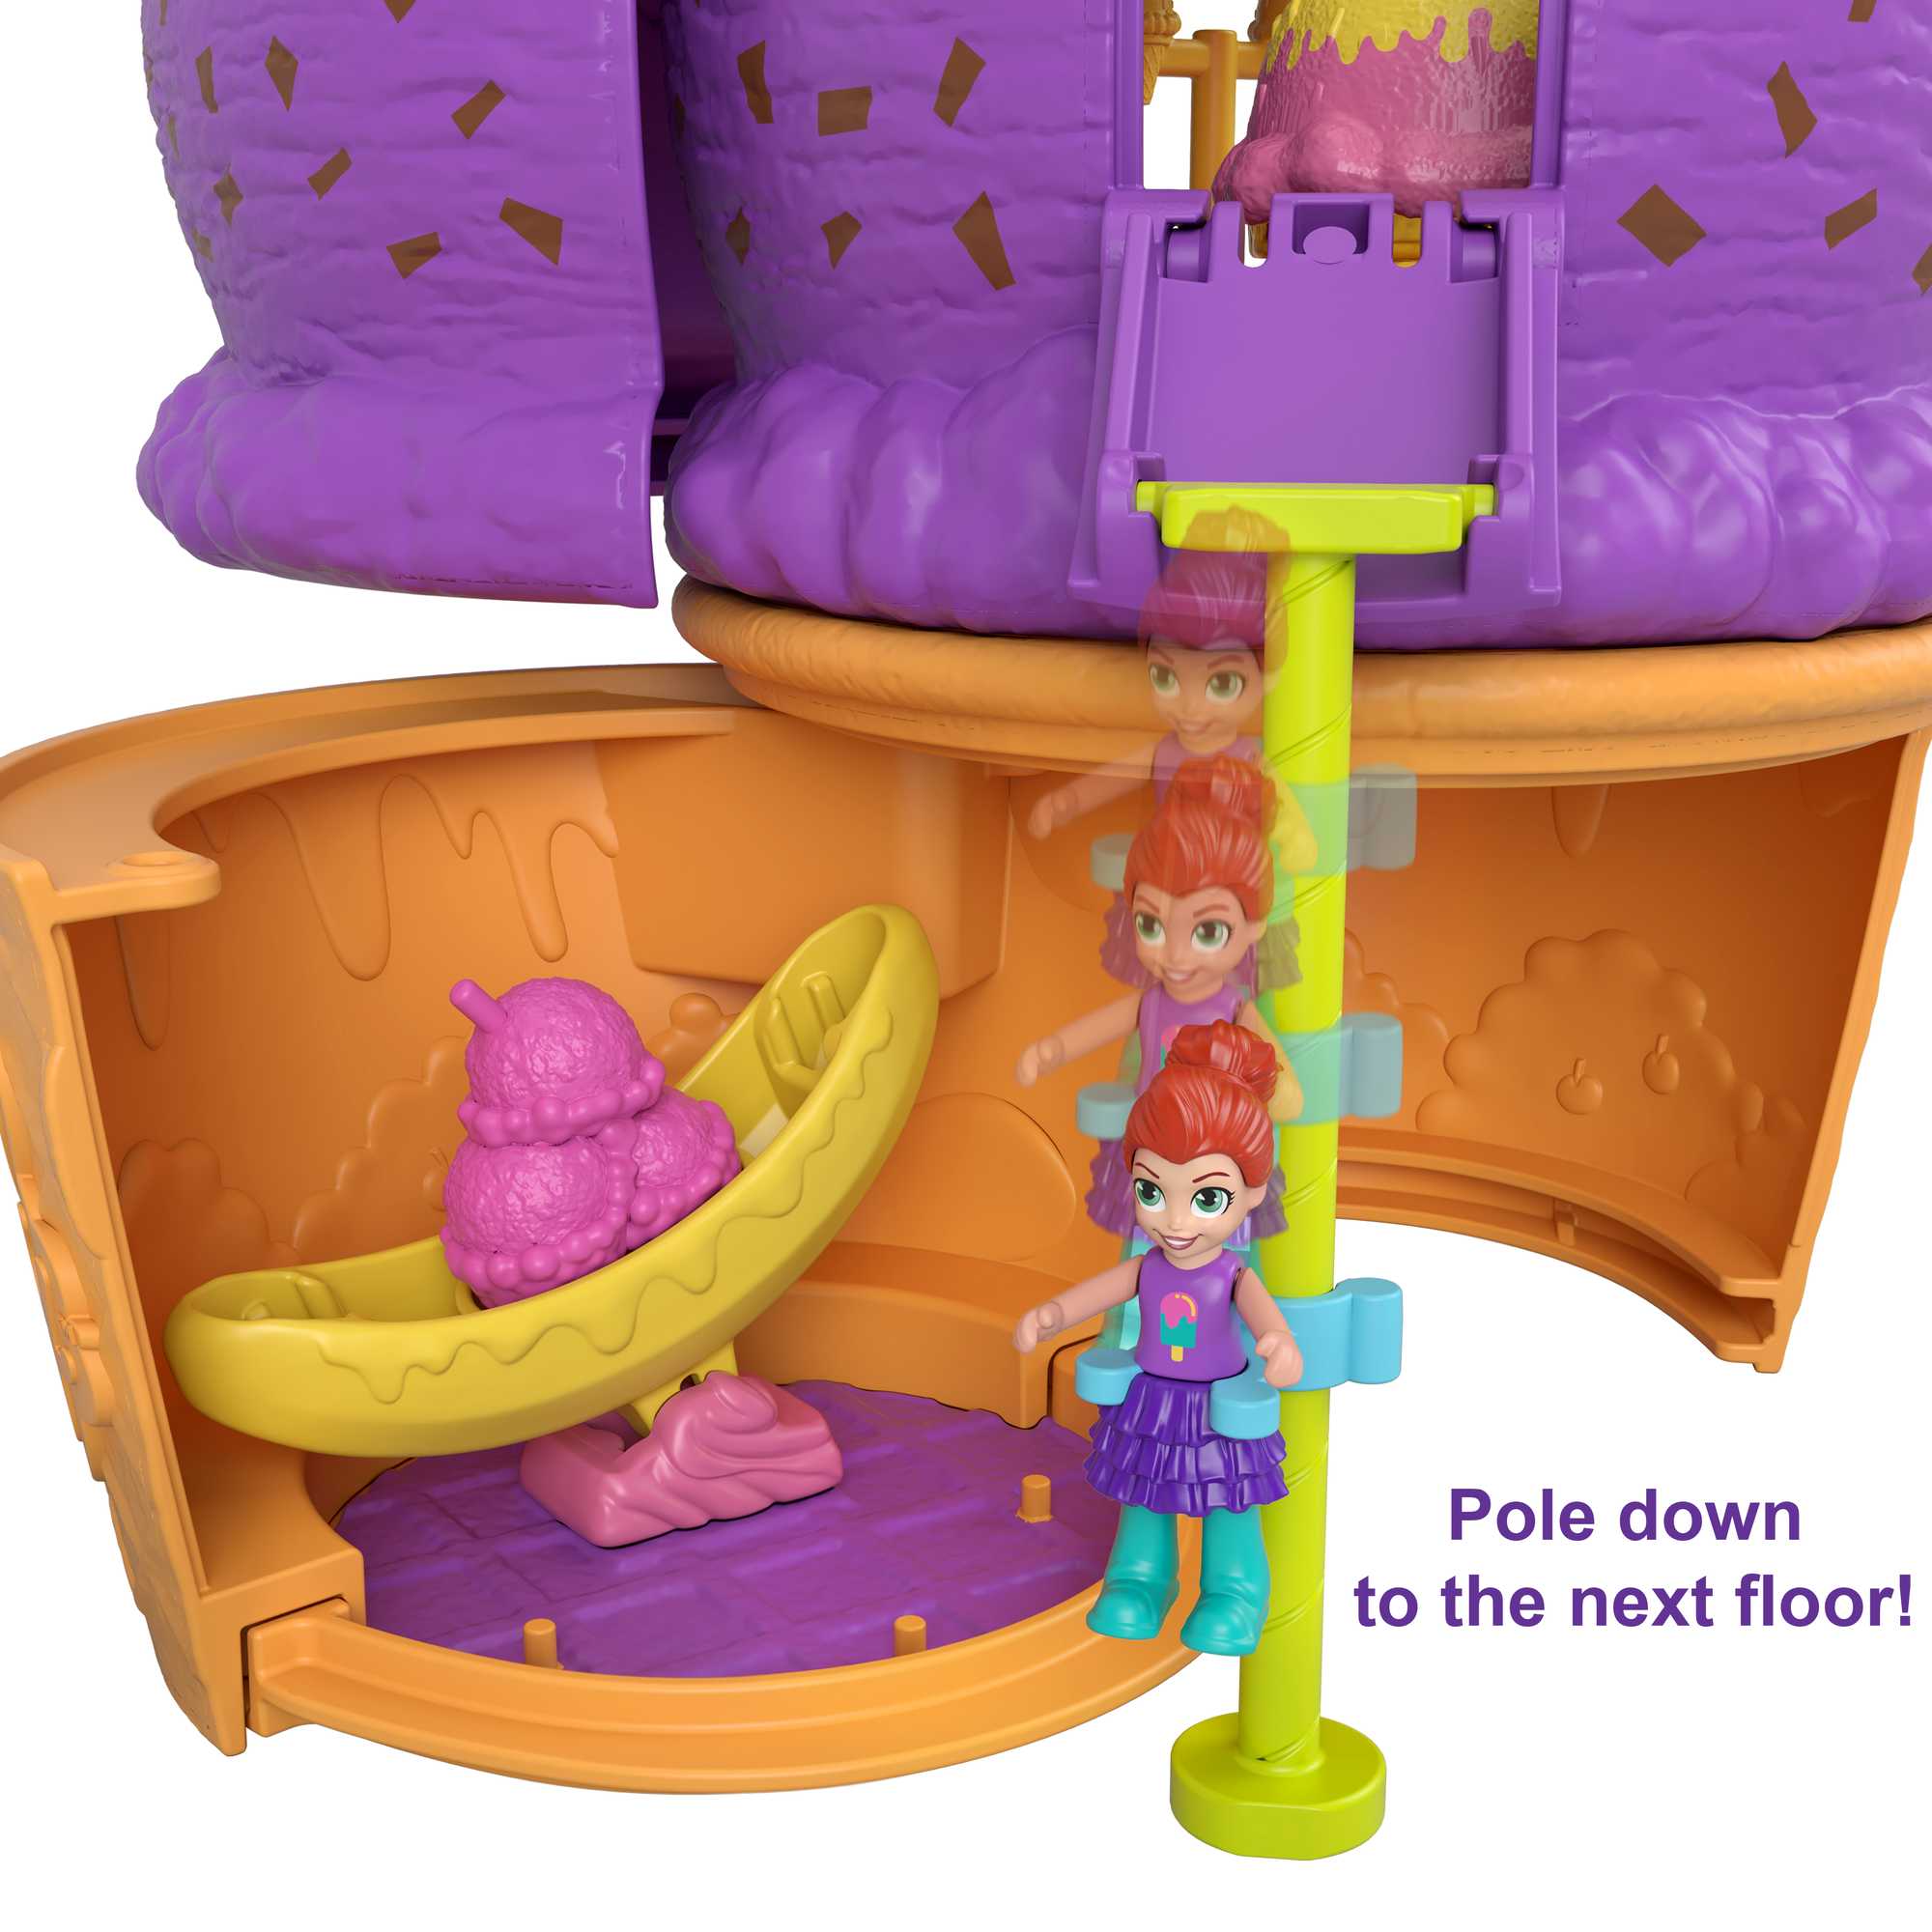 MATTEL sur X : Sneaky sneaky! 😱💕 The latest line of Polly Pocket  compacts has three secret compartments hidden behind peel-away panels. Your  tiny ones will have to collect them all to